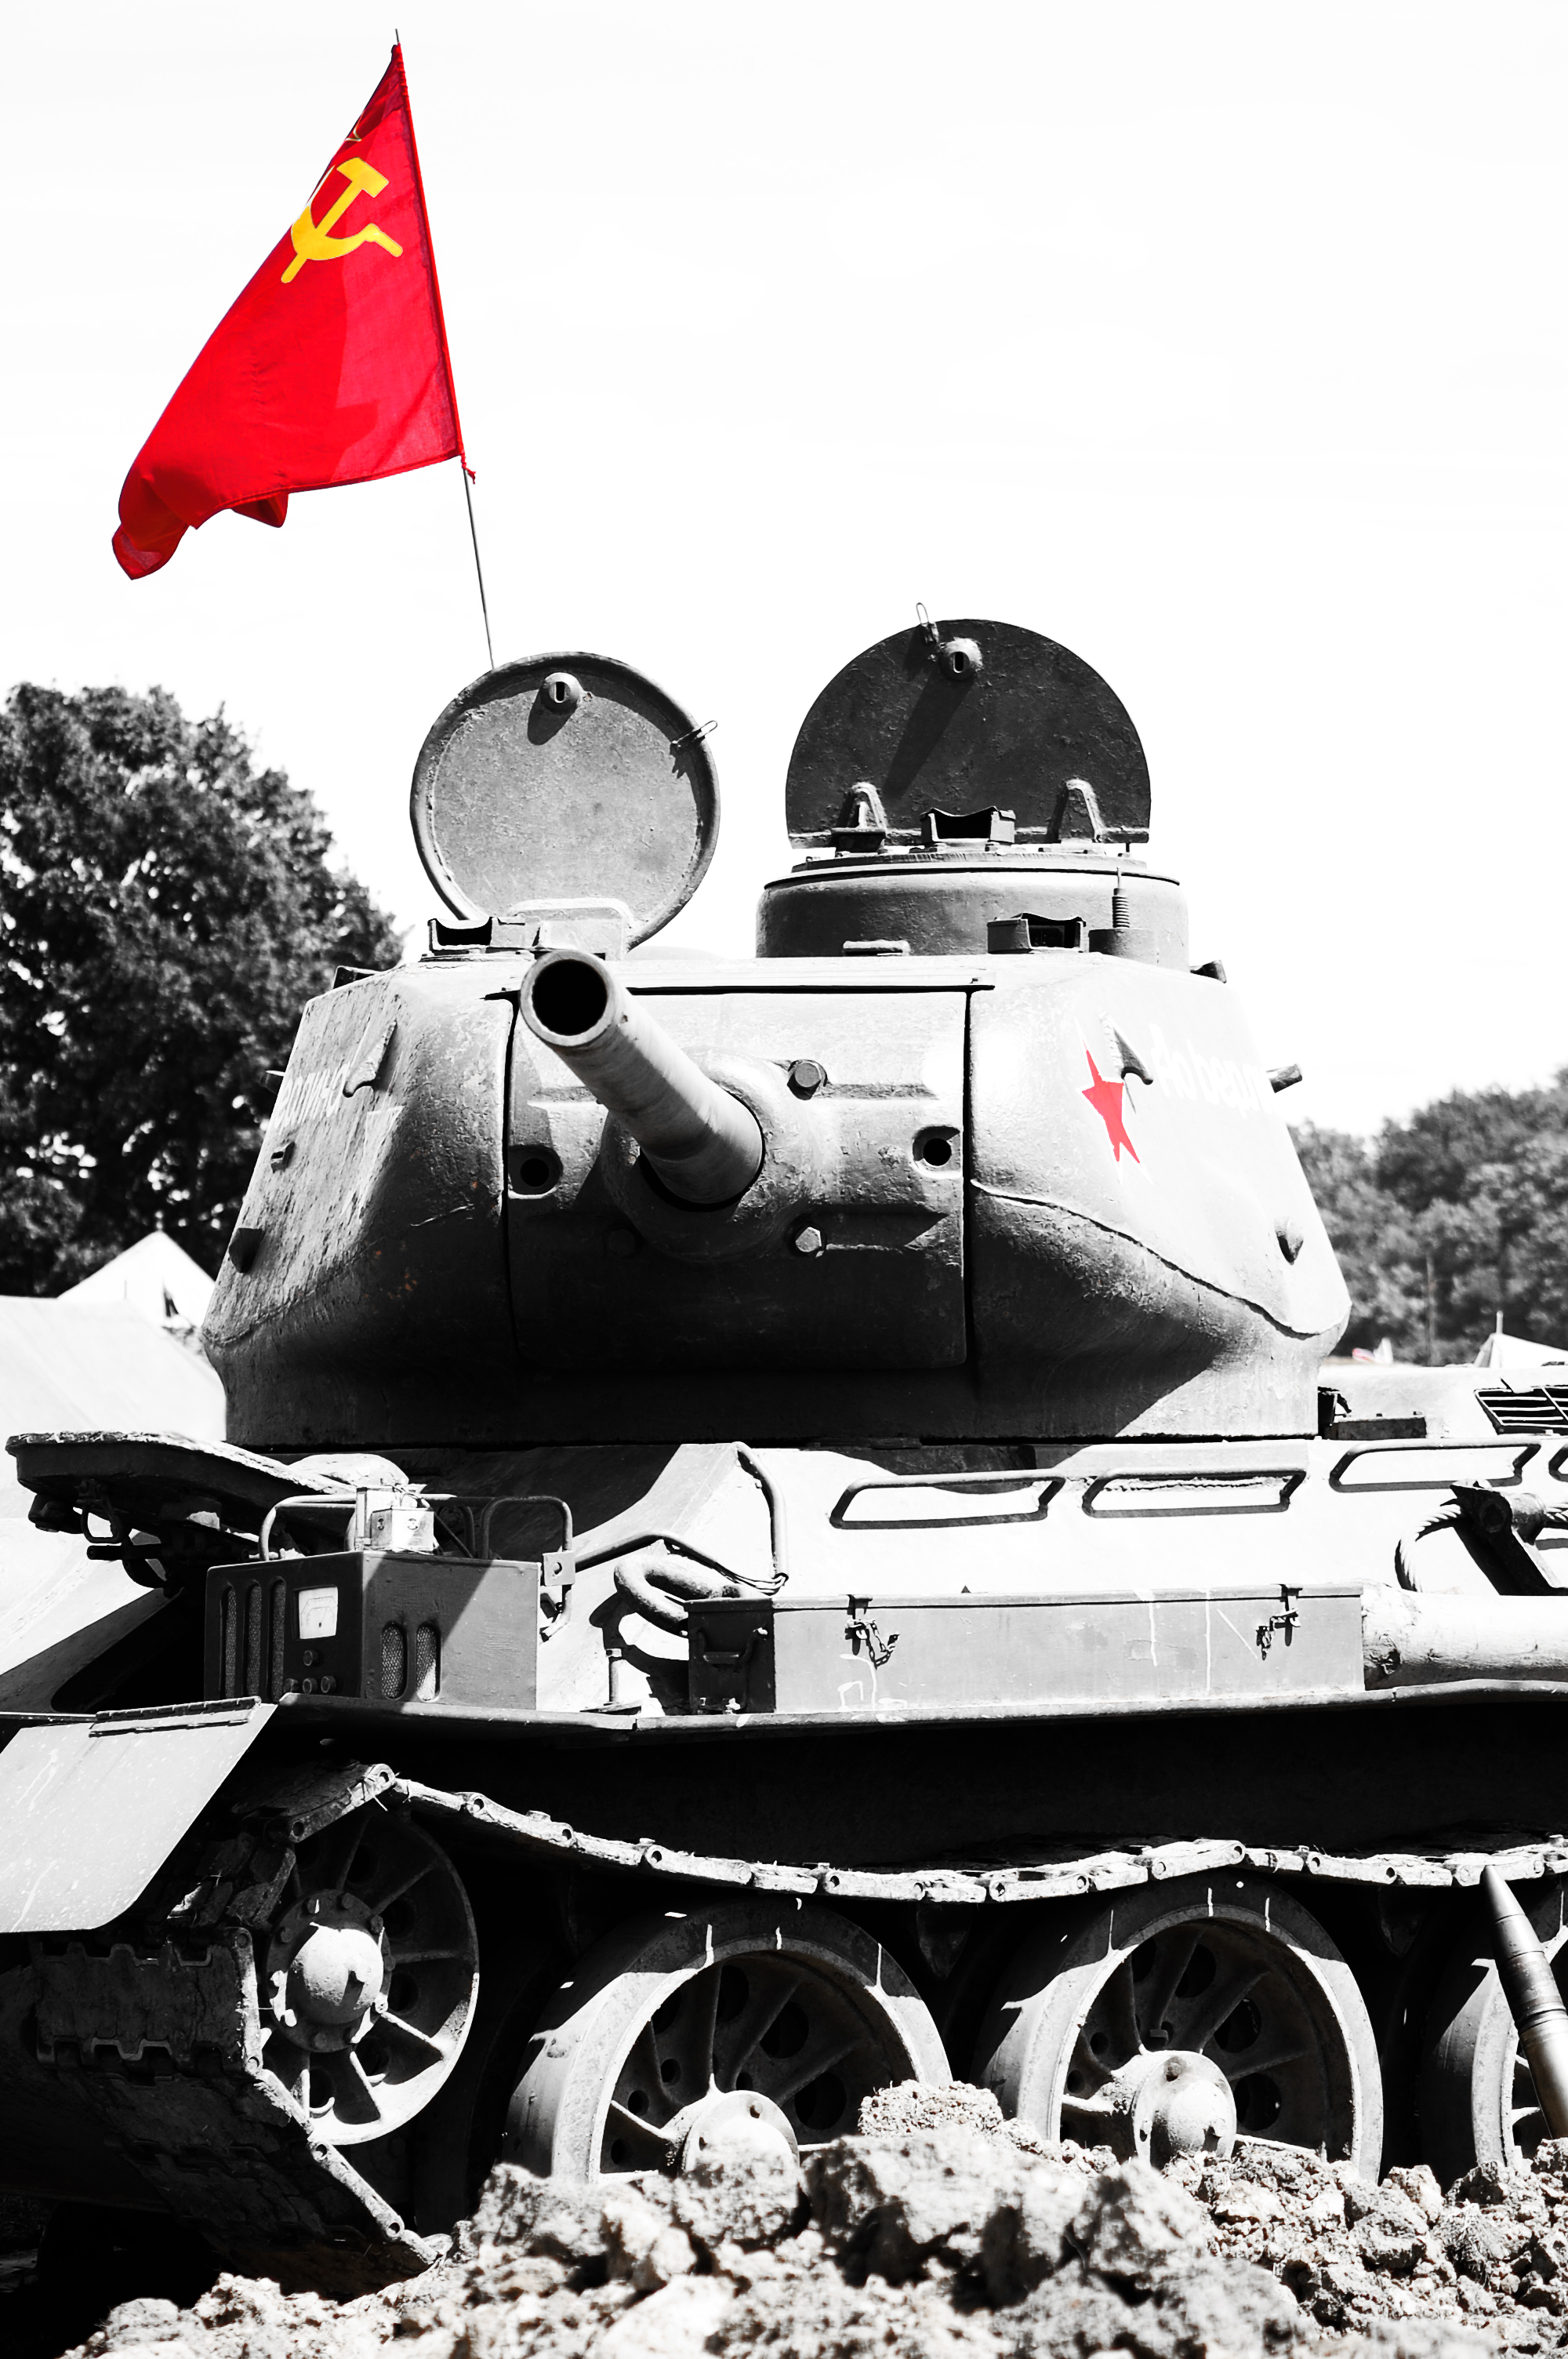 https://upload.wikimedia.org/wikipedia/commons/1/1a/T-34-85_tank_with_the_flag_of_the_Soviet_Union.jpg